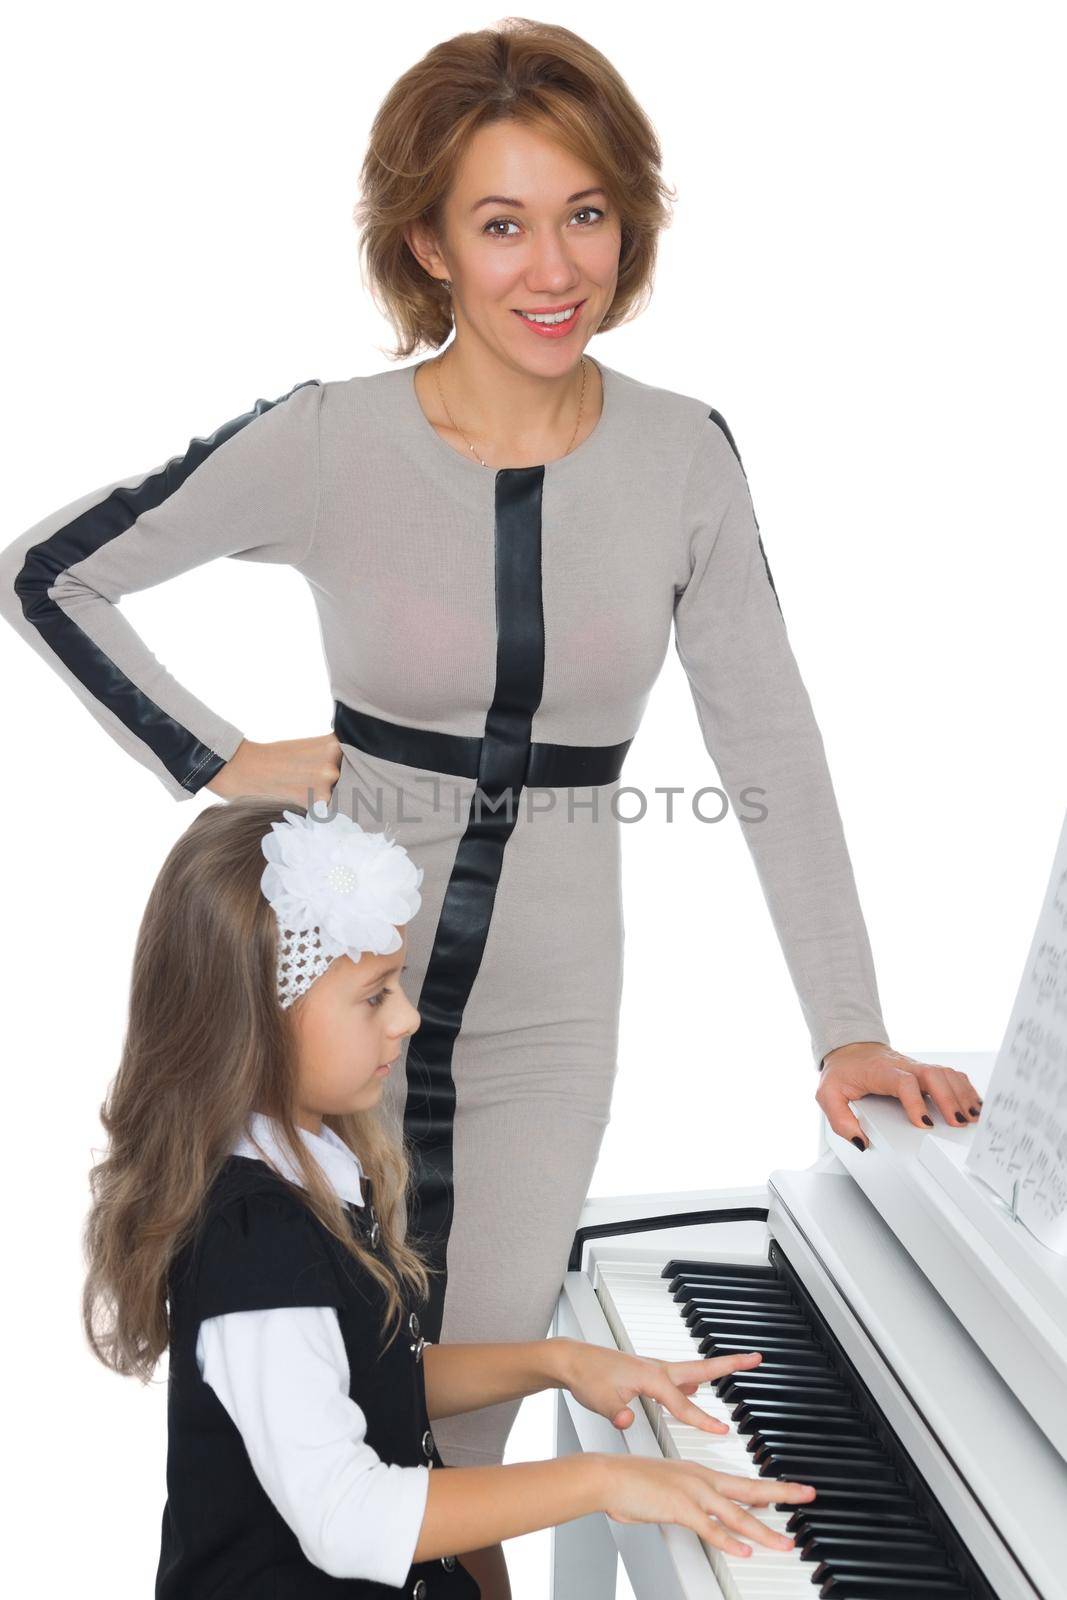 The girl at the music school diligently learn to play piano music , which gave her music teacher - Isolated on white background